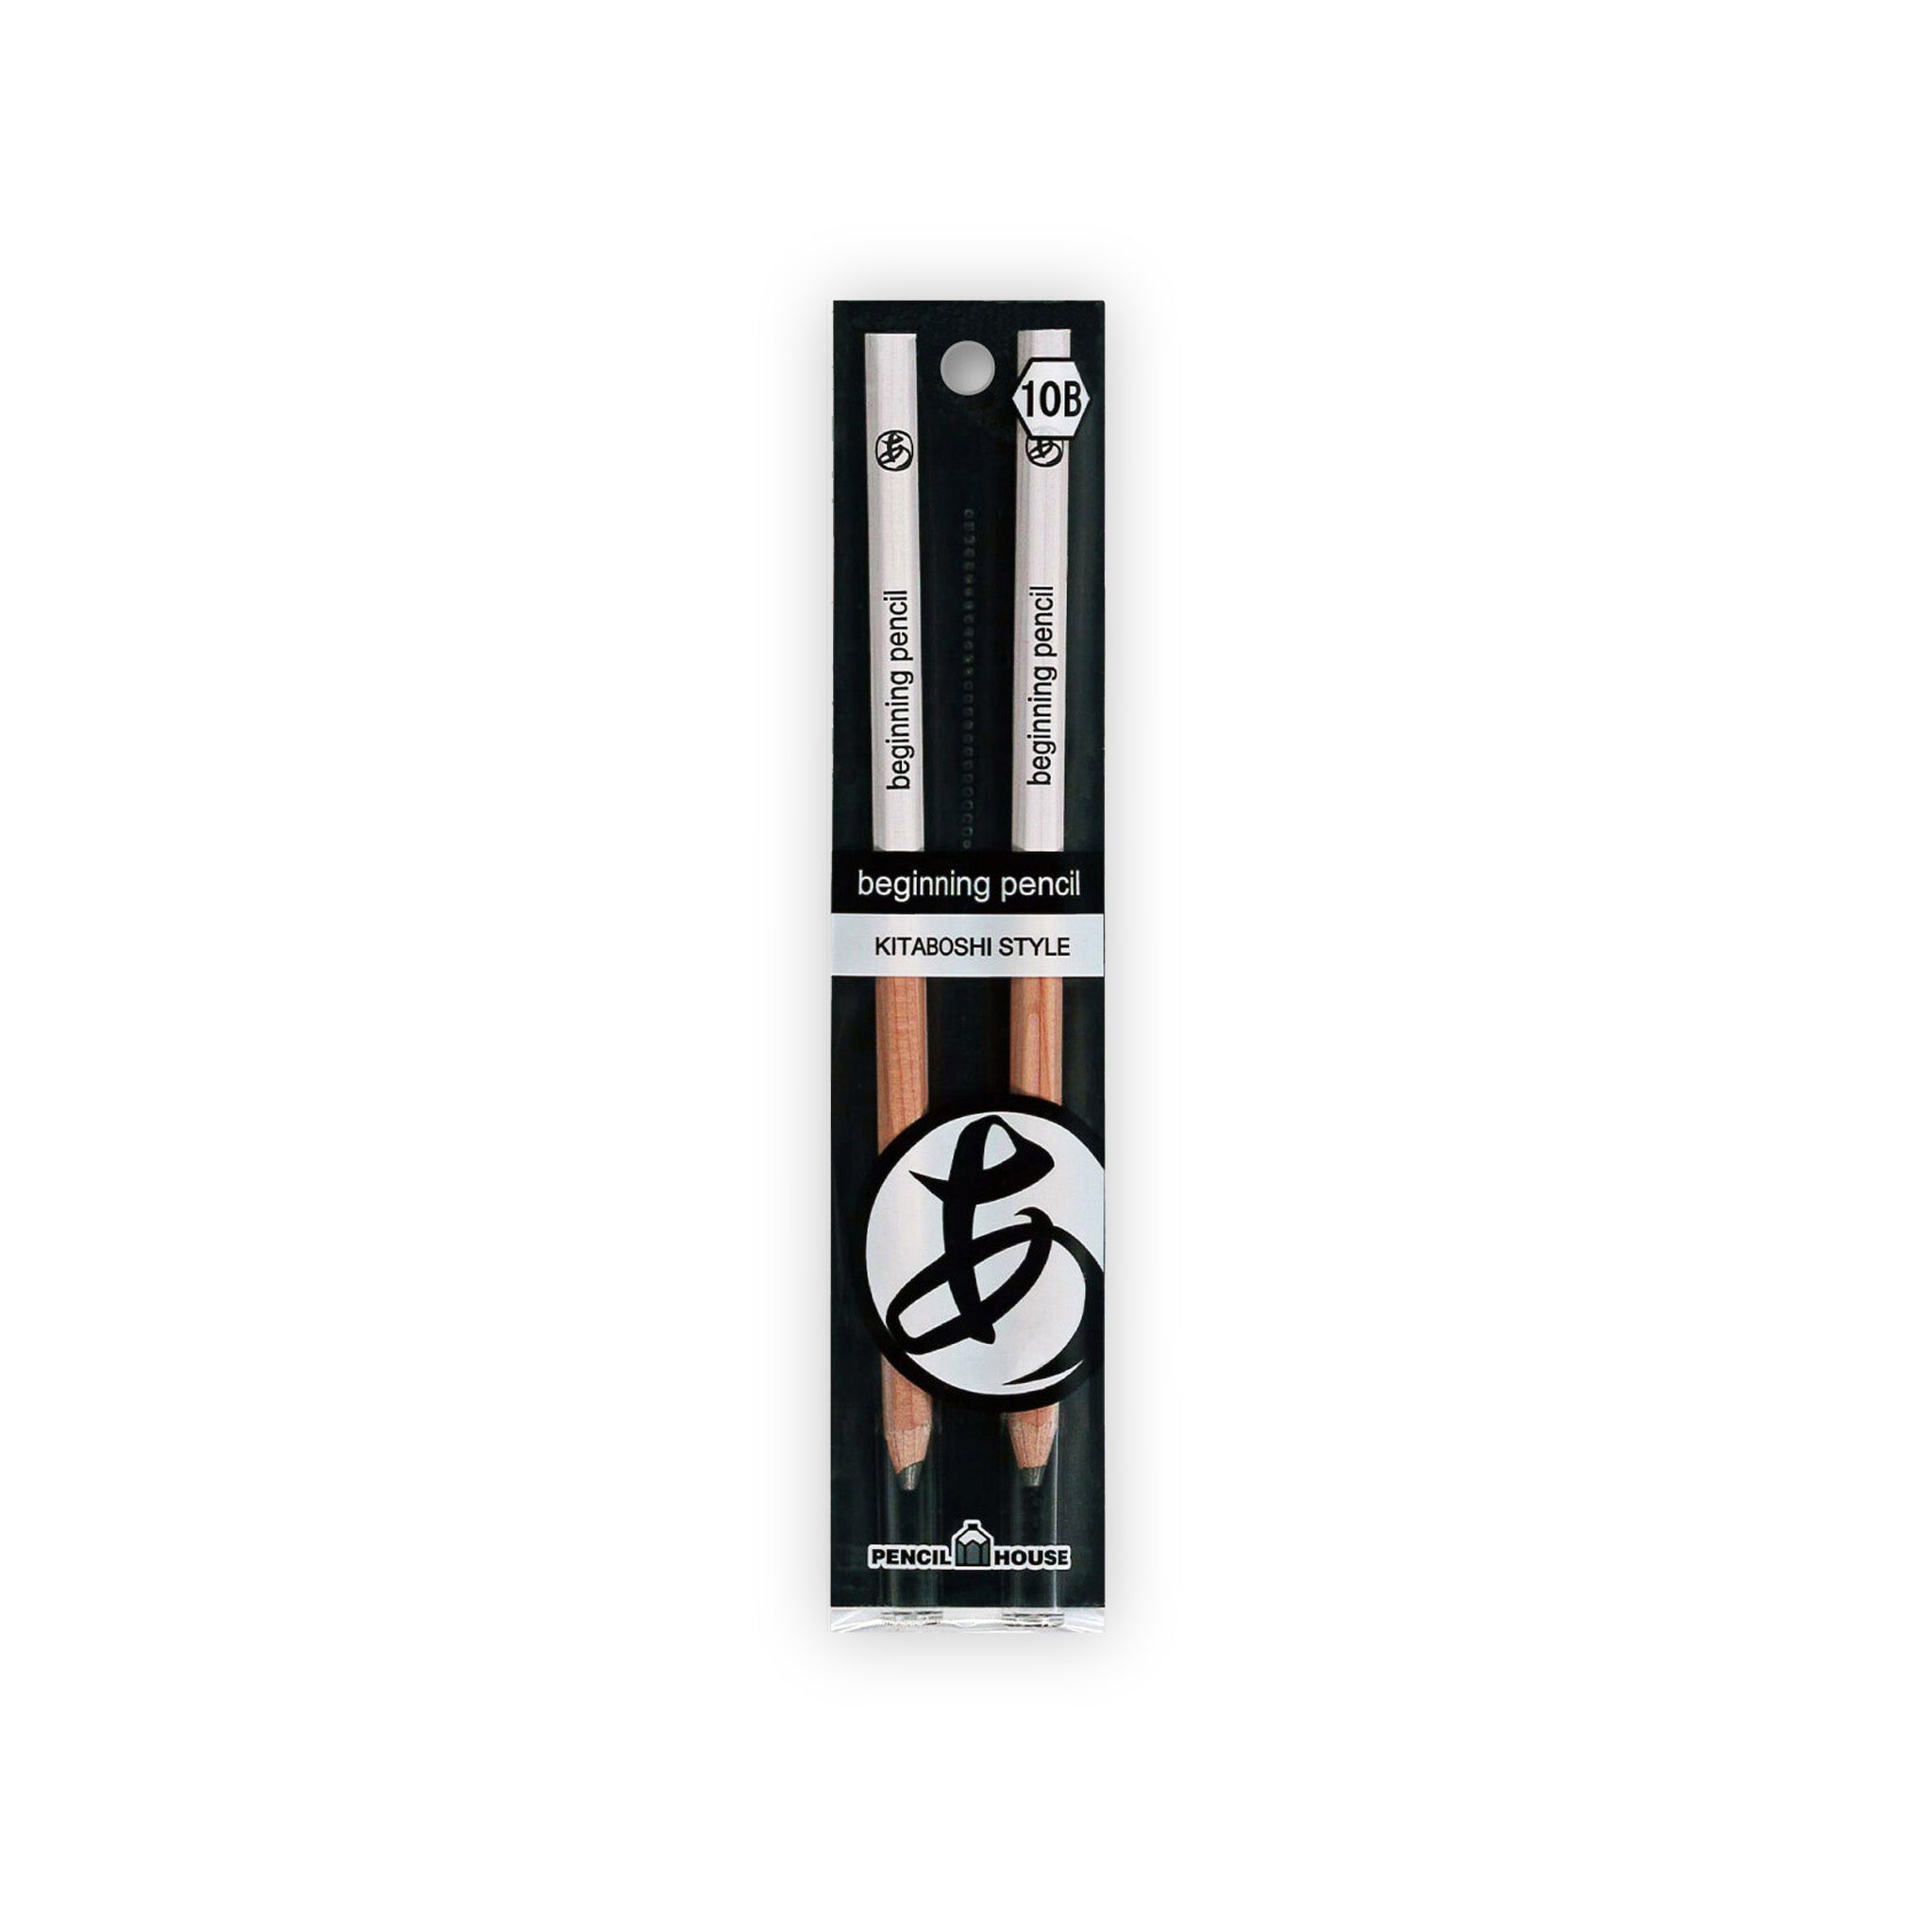 A packet of two pencils, wrapped in plastic in black packaging. On the front it says "10B Beginning Pencil Kitaboshi Style".